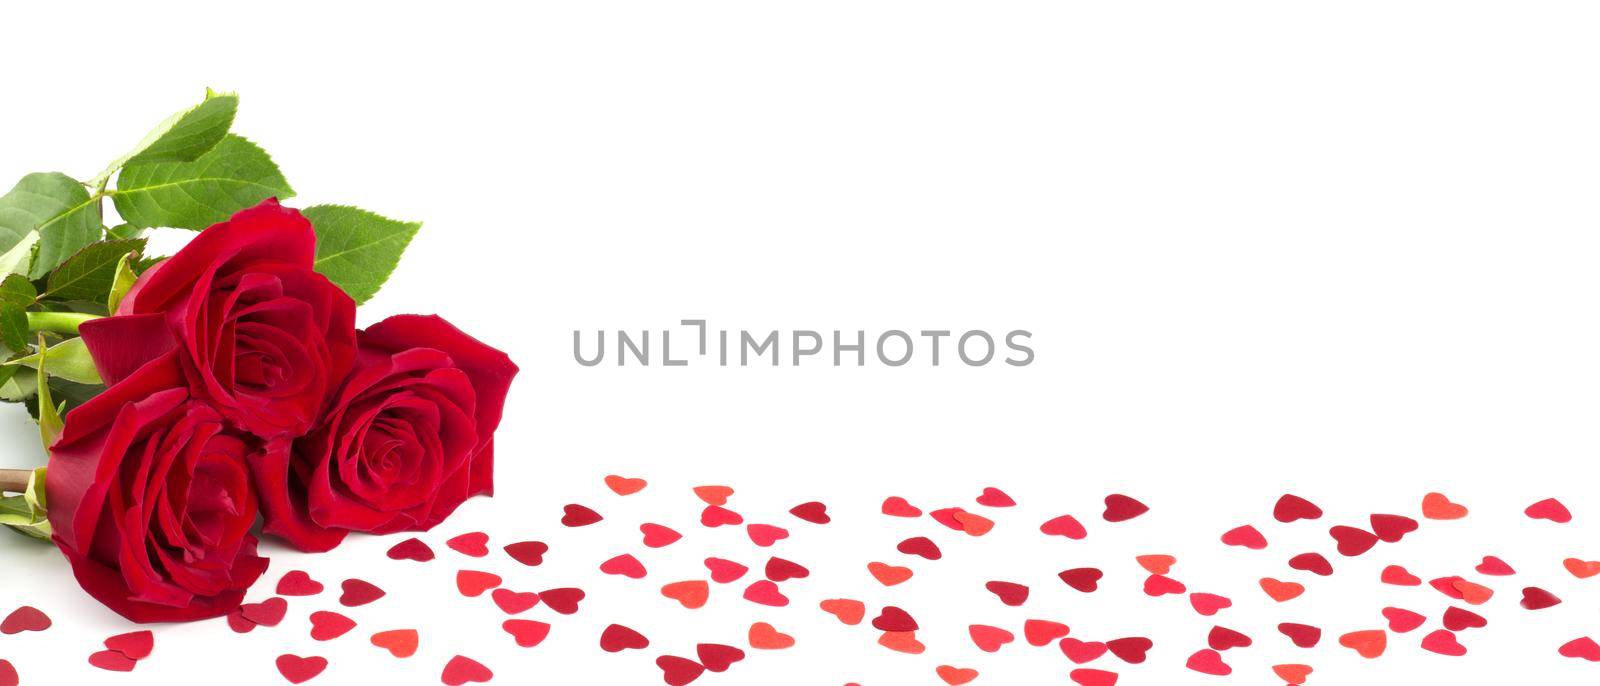 Three red roses and many small paper hearts isolated on white background, love romantic gift for Valentine day, border frame design with copy space for text